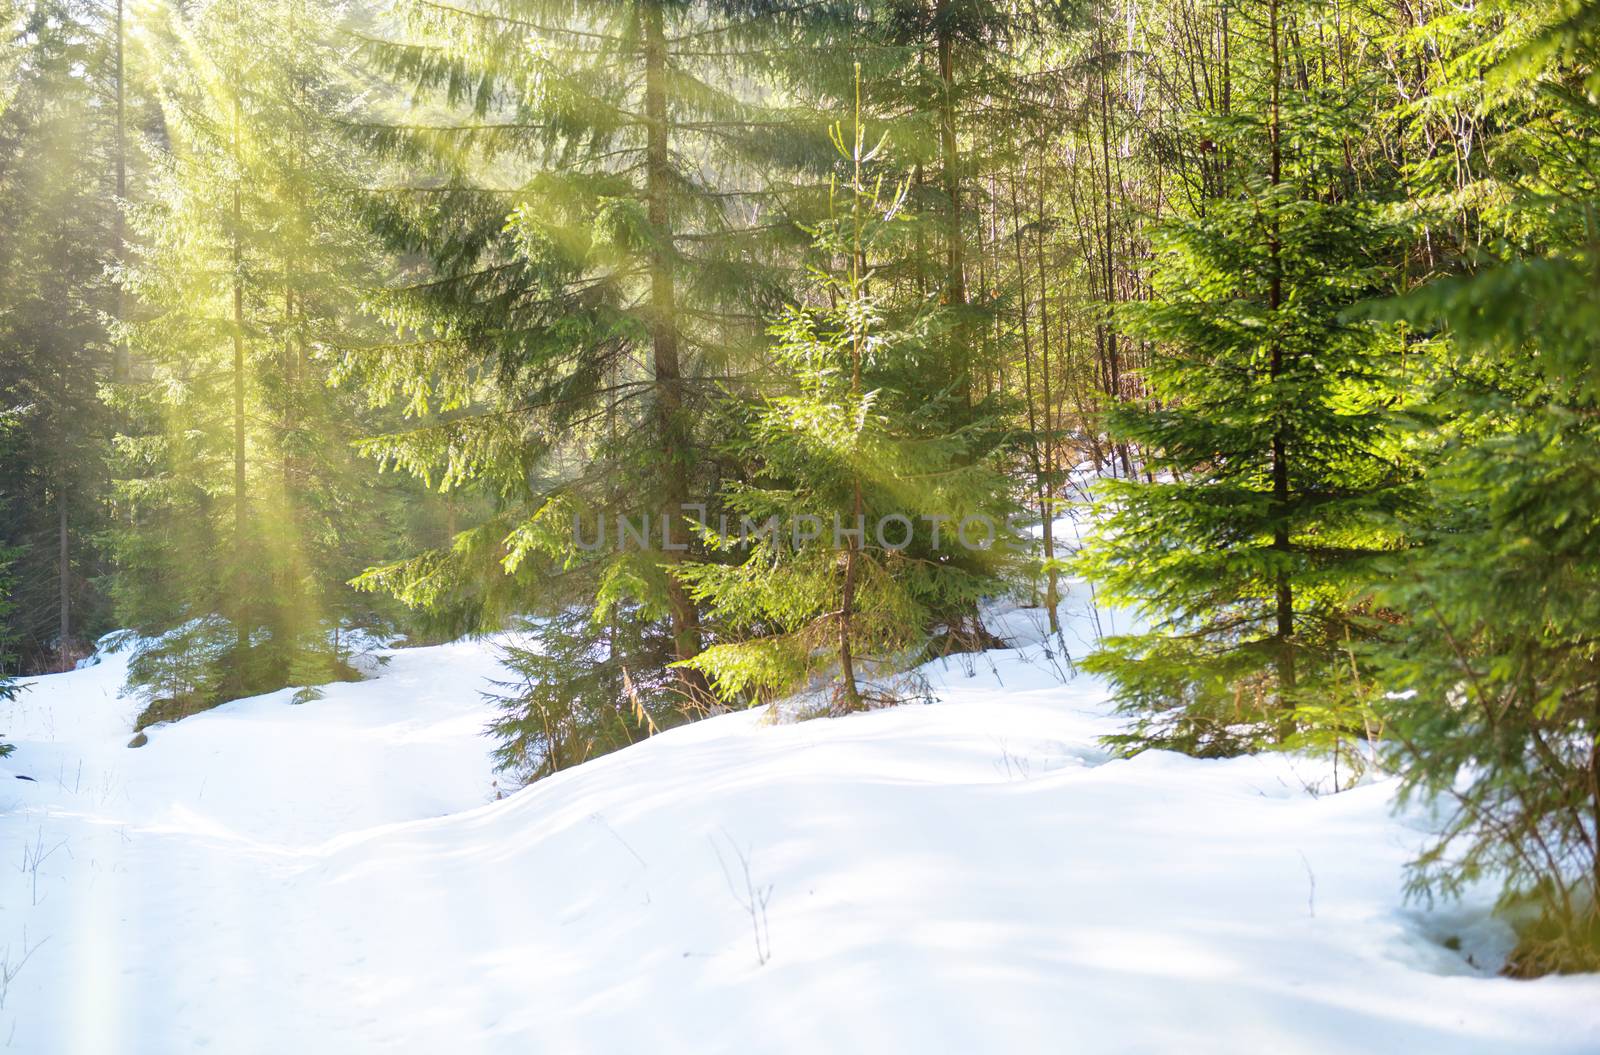 Sun light in the winter forest with white fresh snow and pine trees